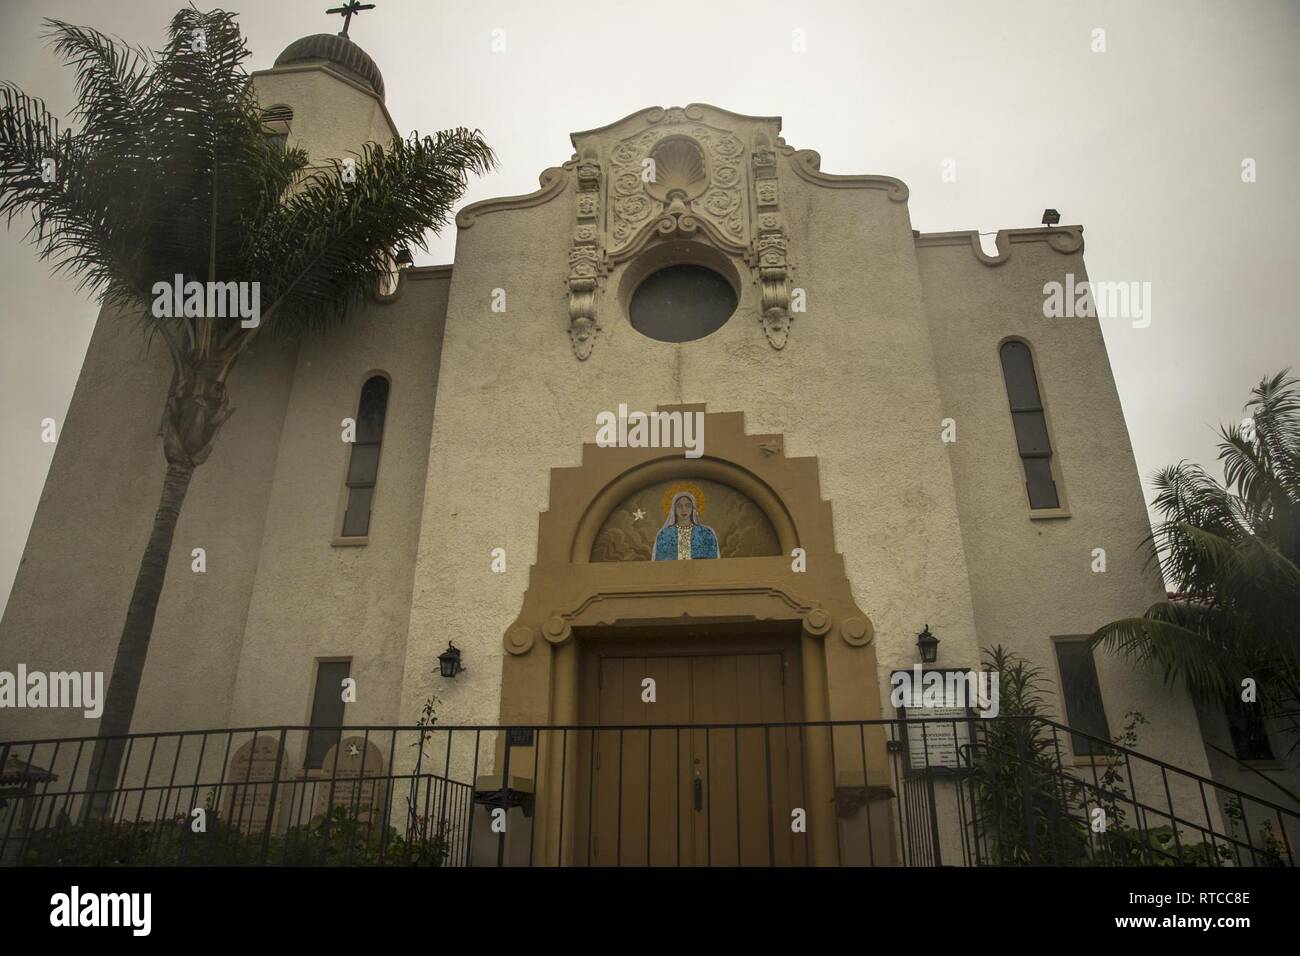 This Valentine's Day, 1st Marine Division shares the story of the celebrated Gunnery Sergeant John Basilone and his wife Lena Mae. This is St. Mary's Star of the Sea Church in Oceanside, California where the couple got married in 1944. Stock Photo